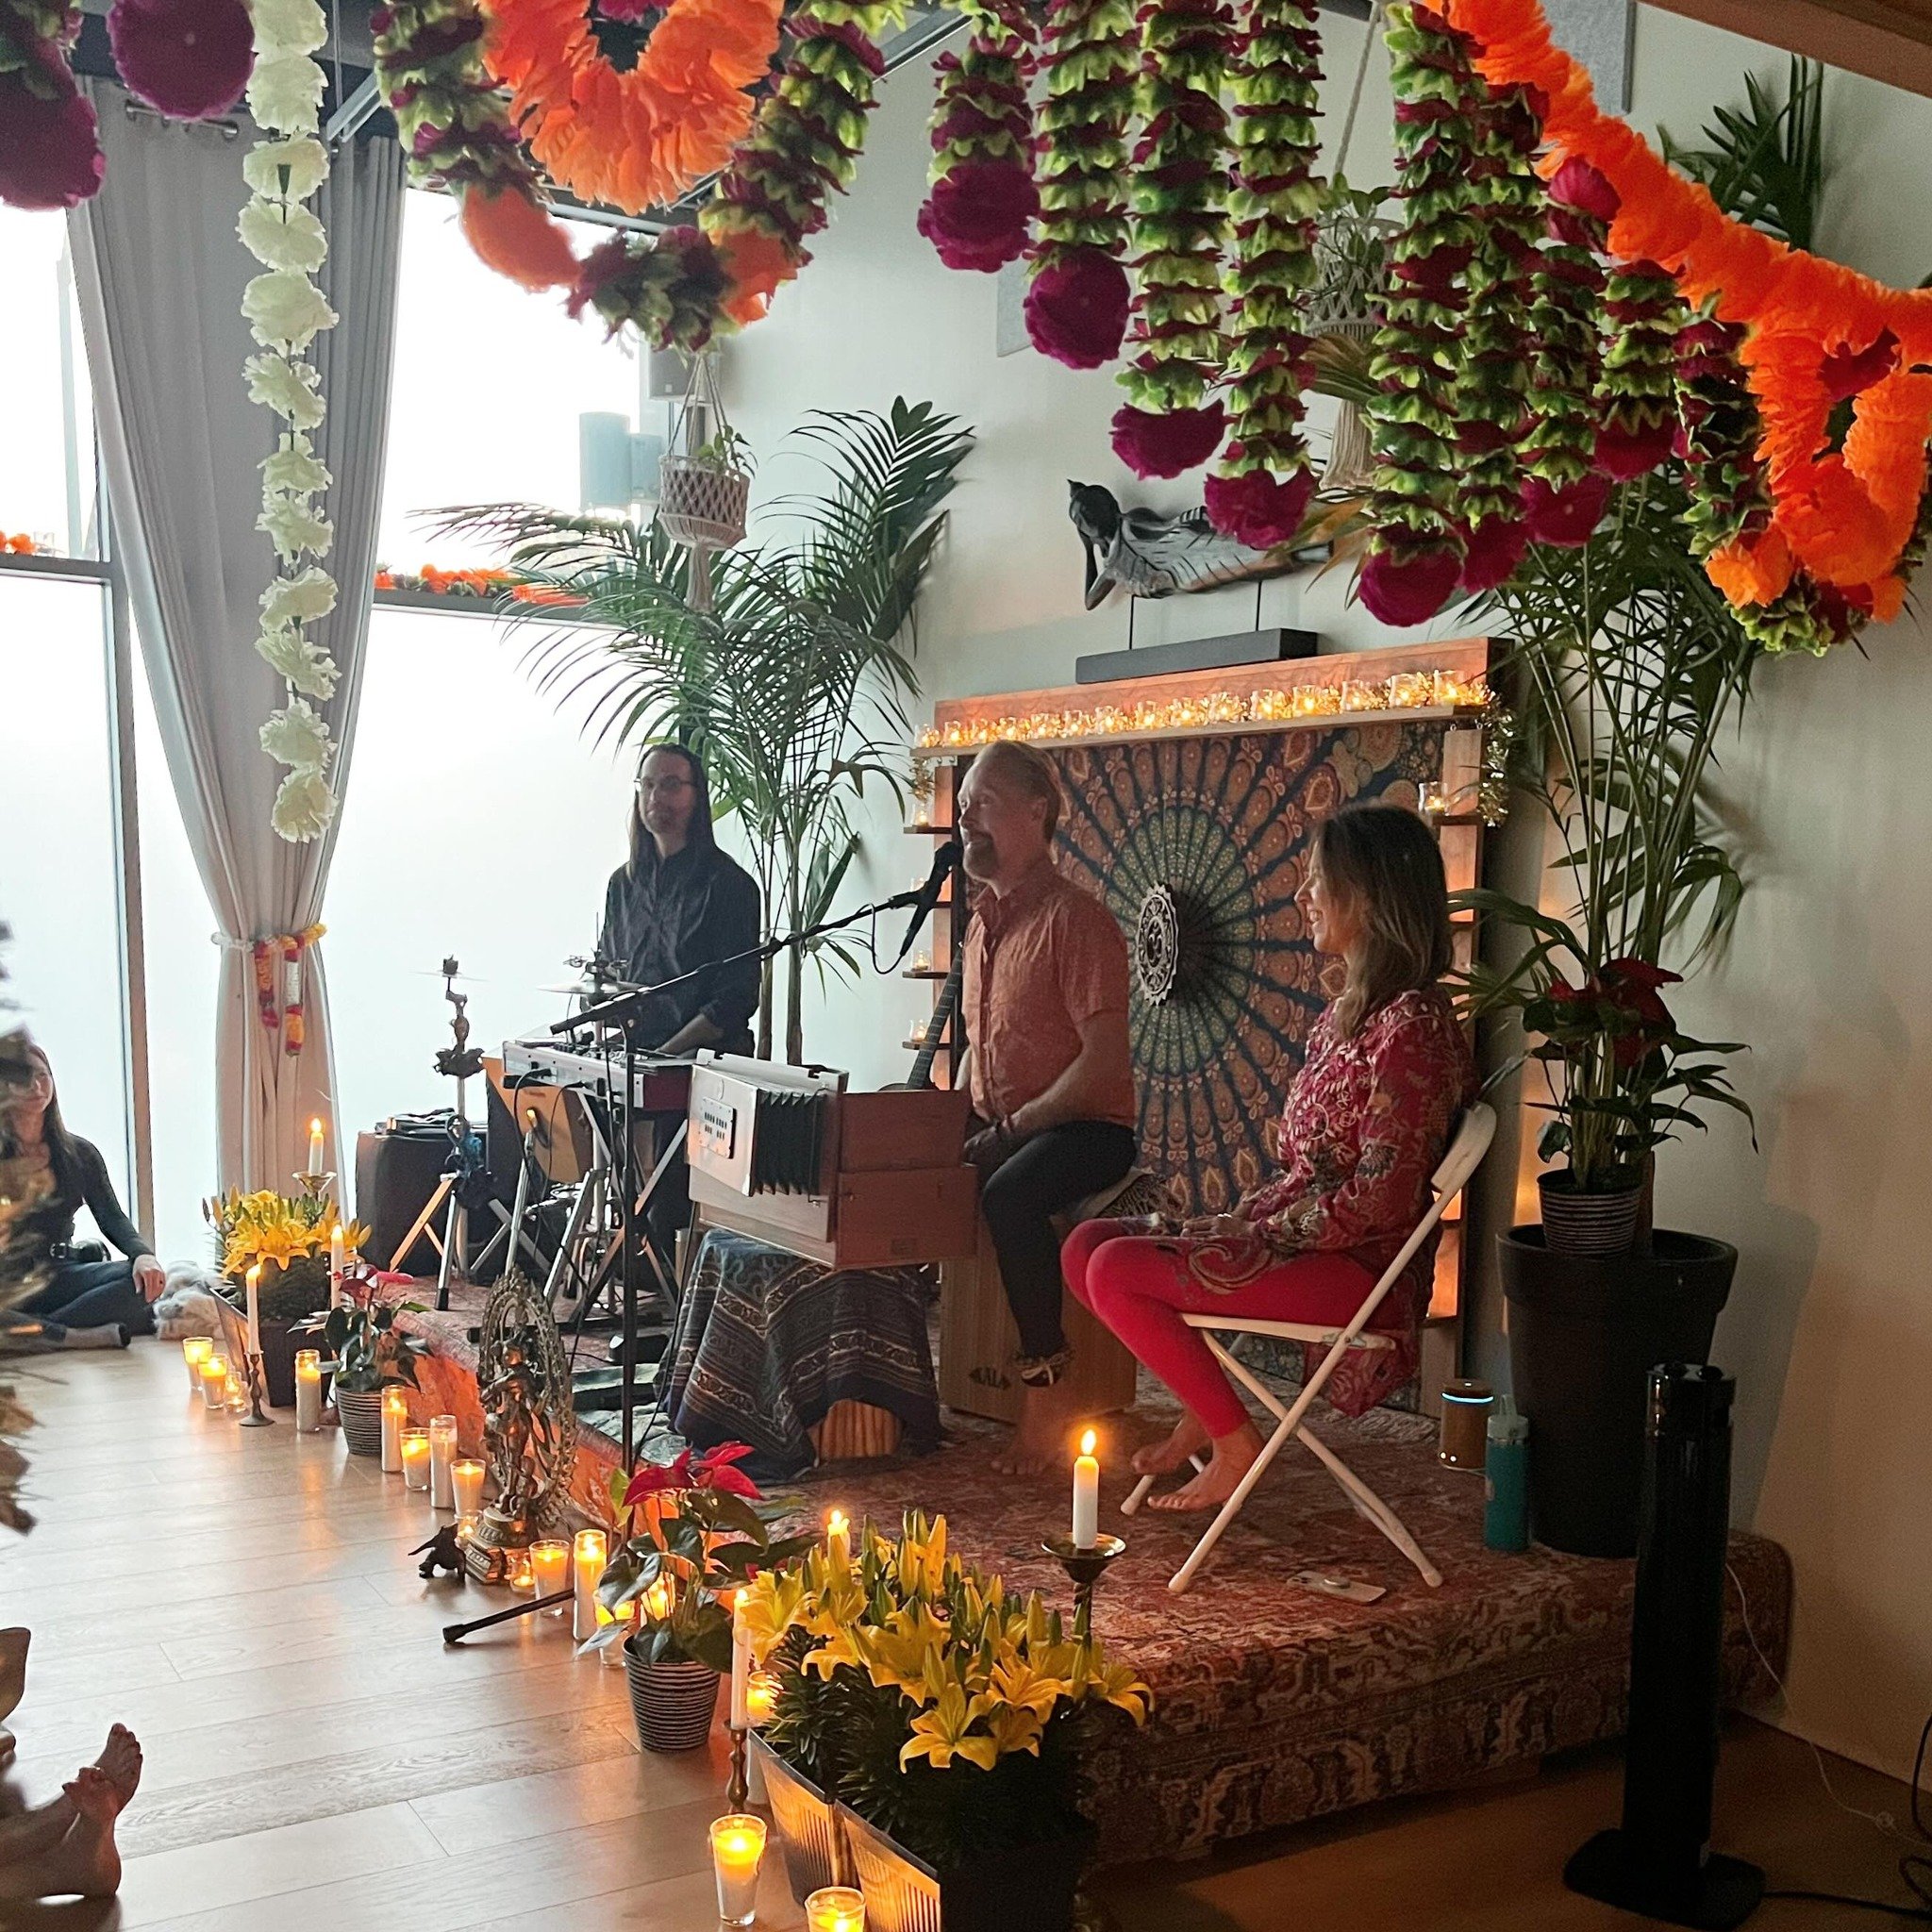 We had the most incredible Kirtan with @girishmusic last night ✨ Such a gift to gather in community like this and connect to our heart space. We are so grateful for the shared energy and love.